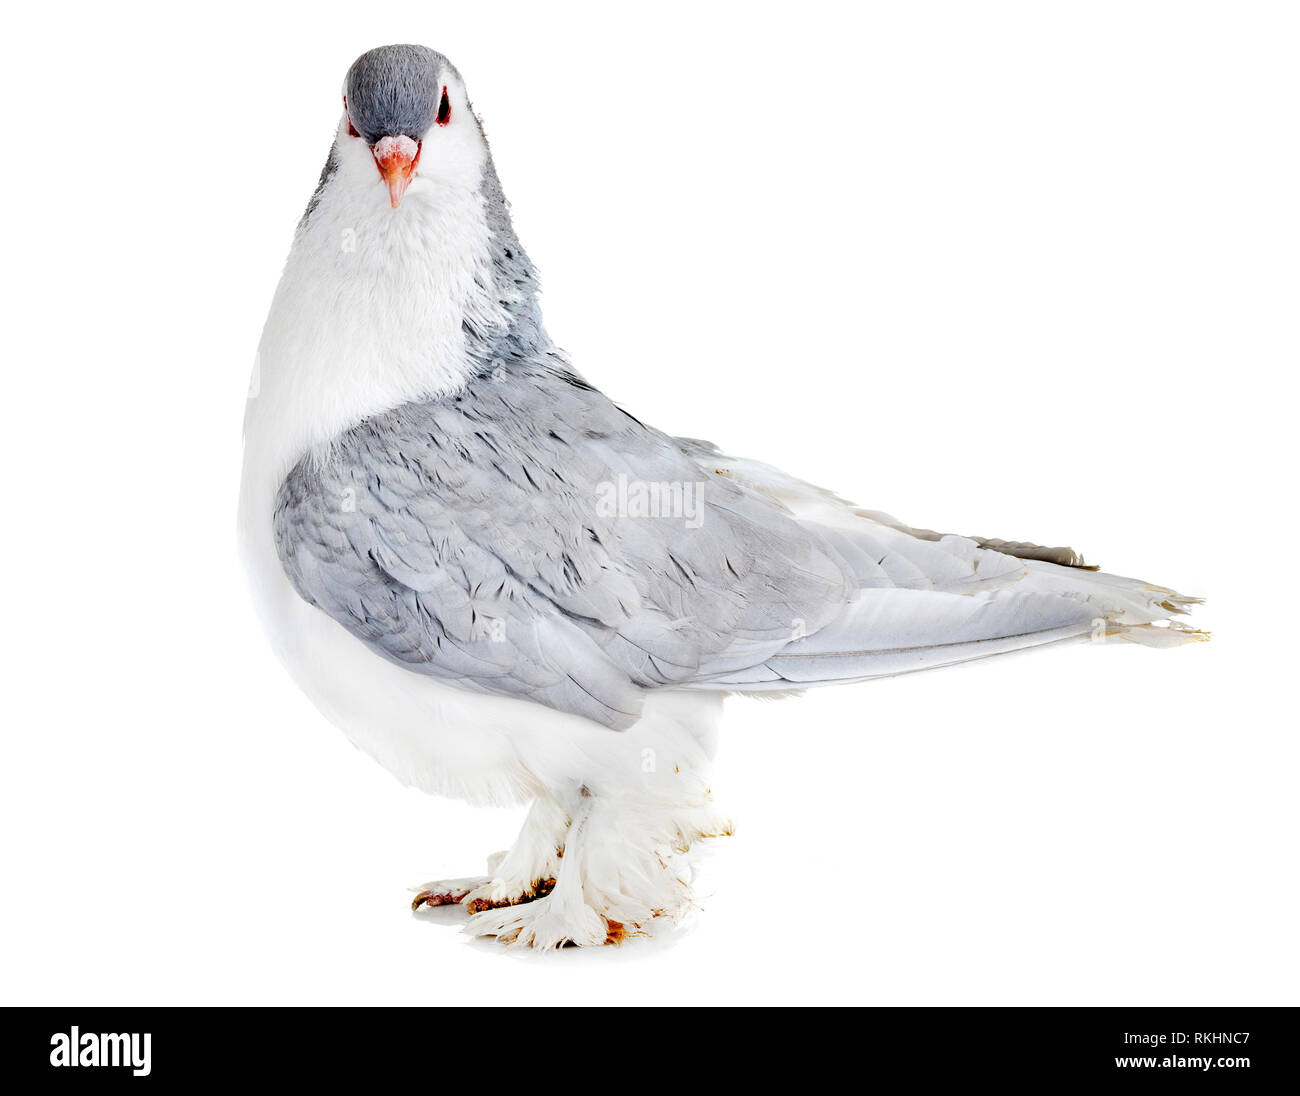 Pigeon Lahore in front of white background Banque D'Images